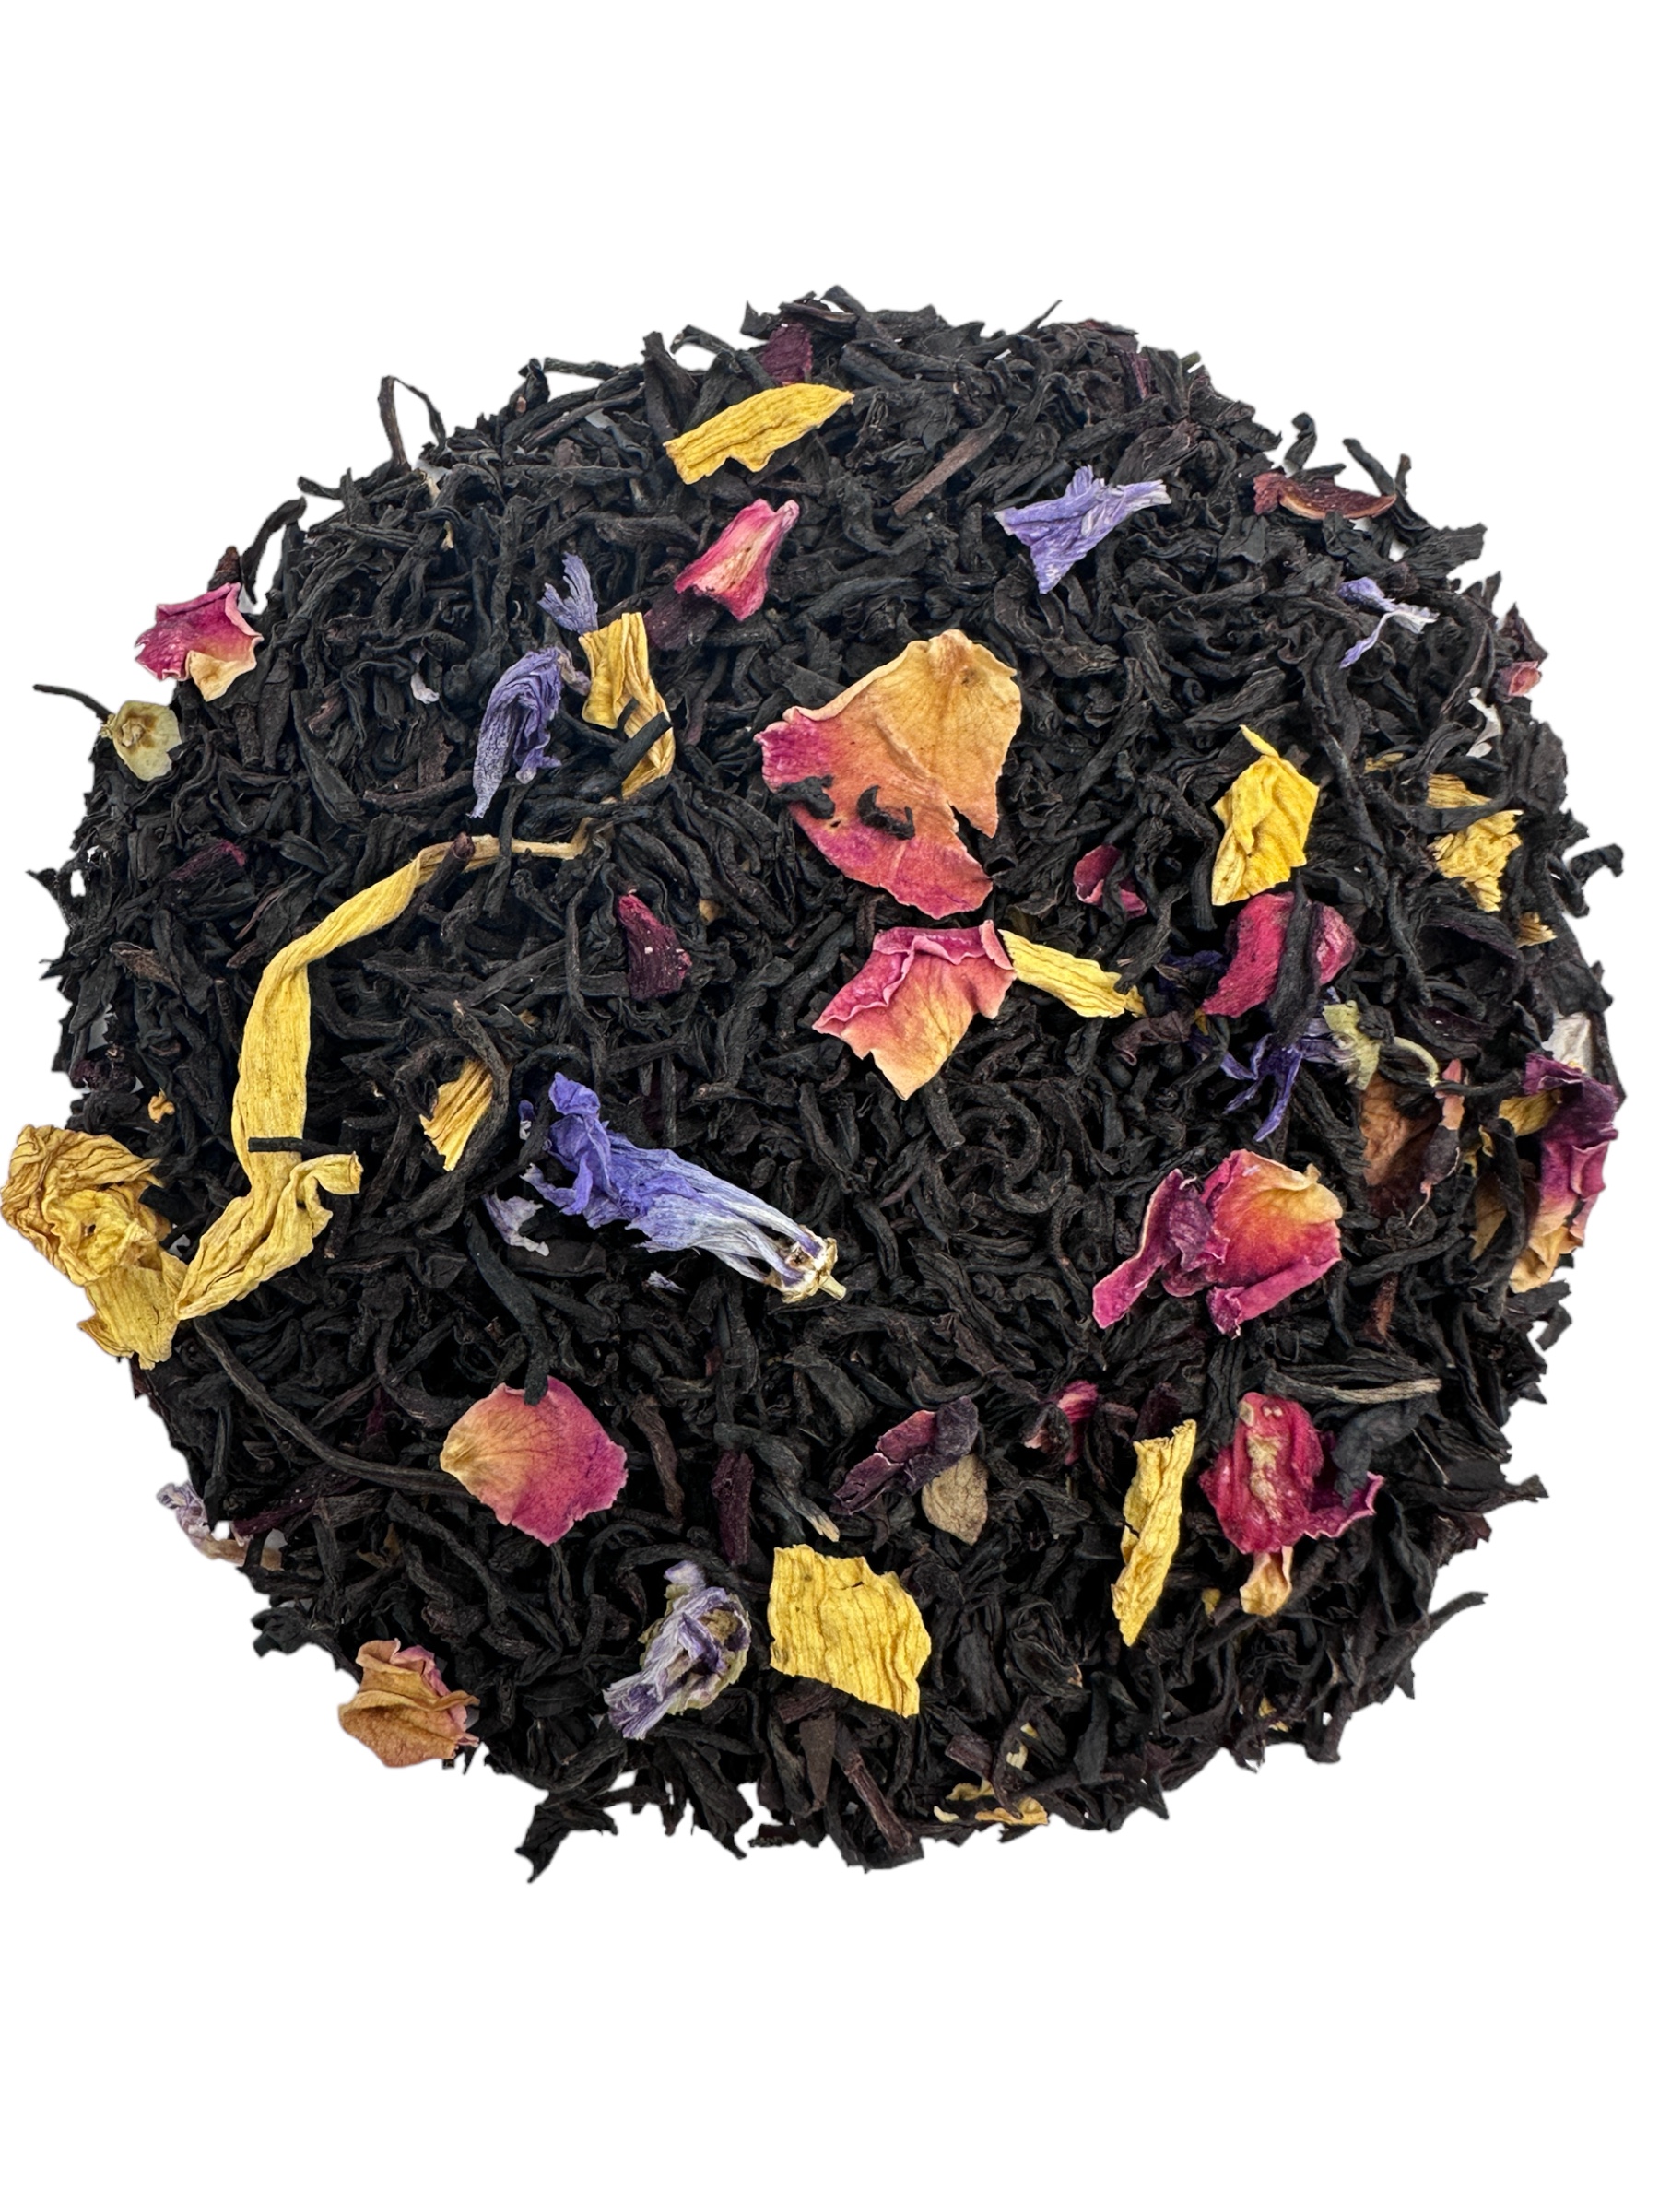 French Earl Grey Gold Medal